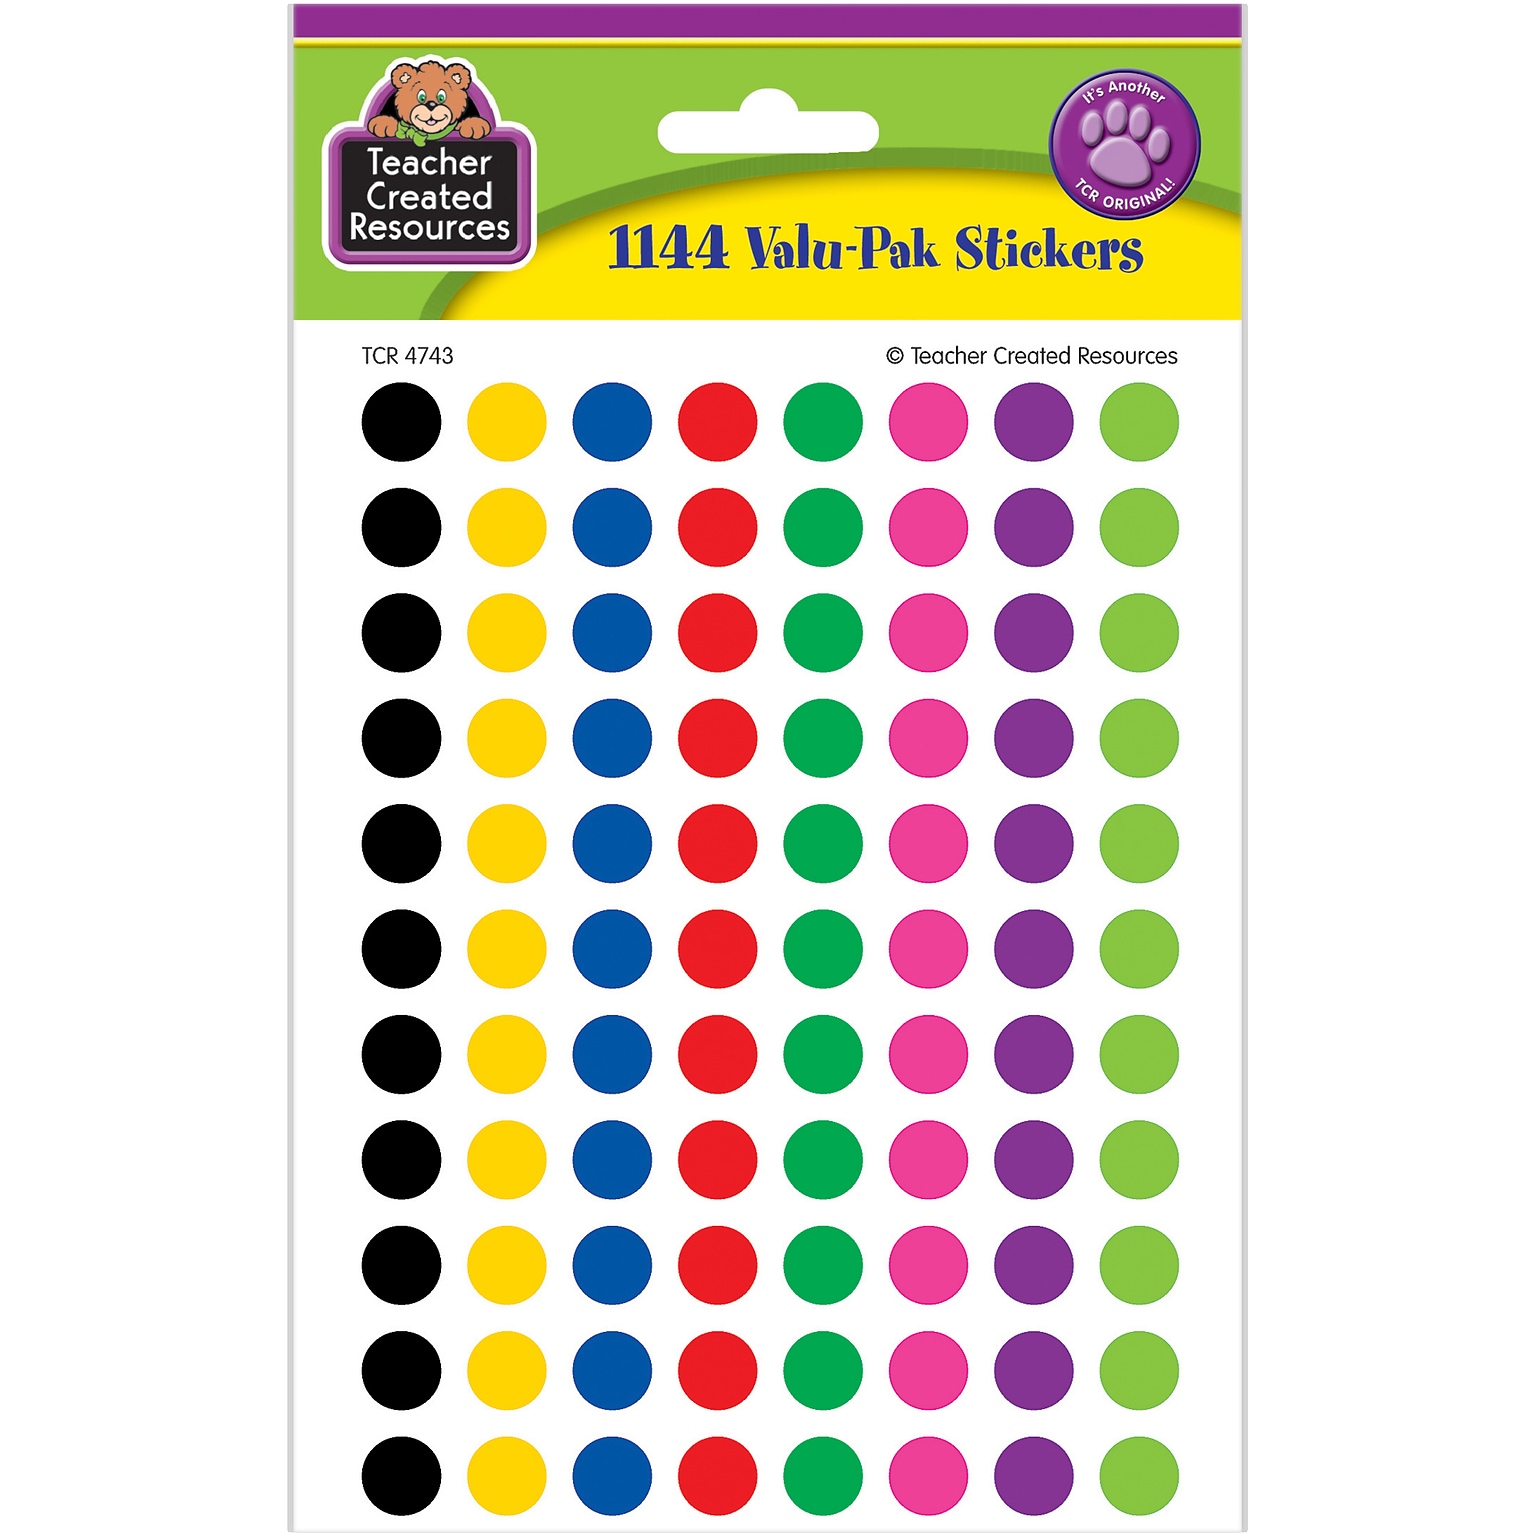 Teacher Created Resources Colorful Circles Mini Stickers, 3/8 Diameter, 1144/PacK, 6 PacK/Bundle (TCR4743)